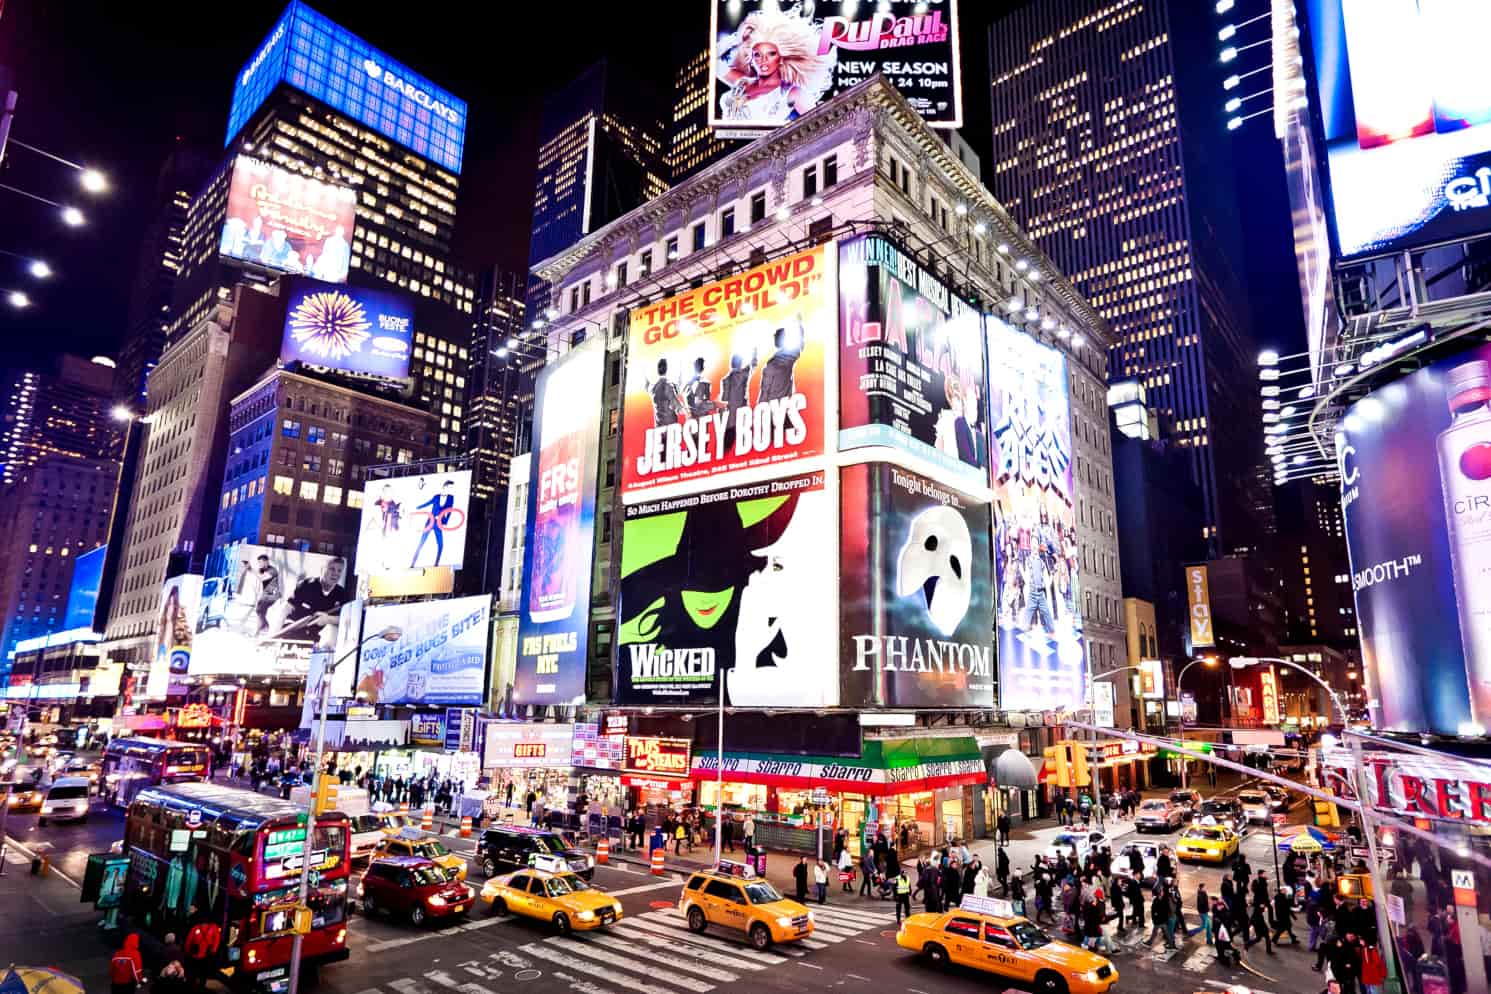 Illuminated Broadway theatres in Times Square, New York